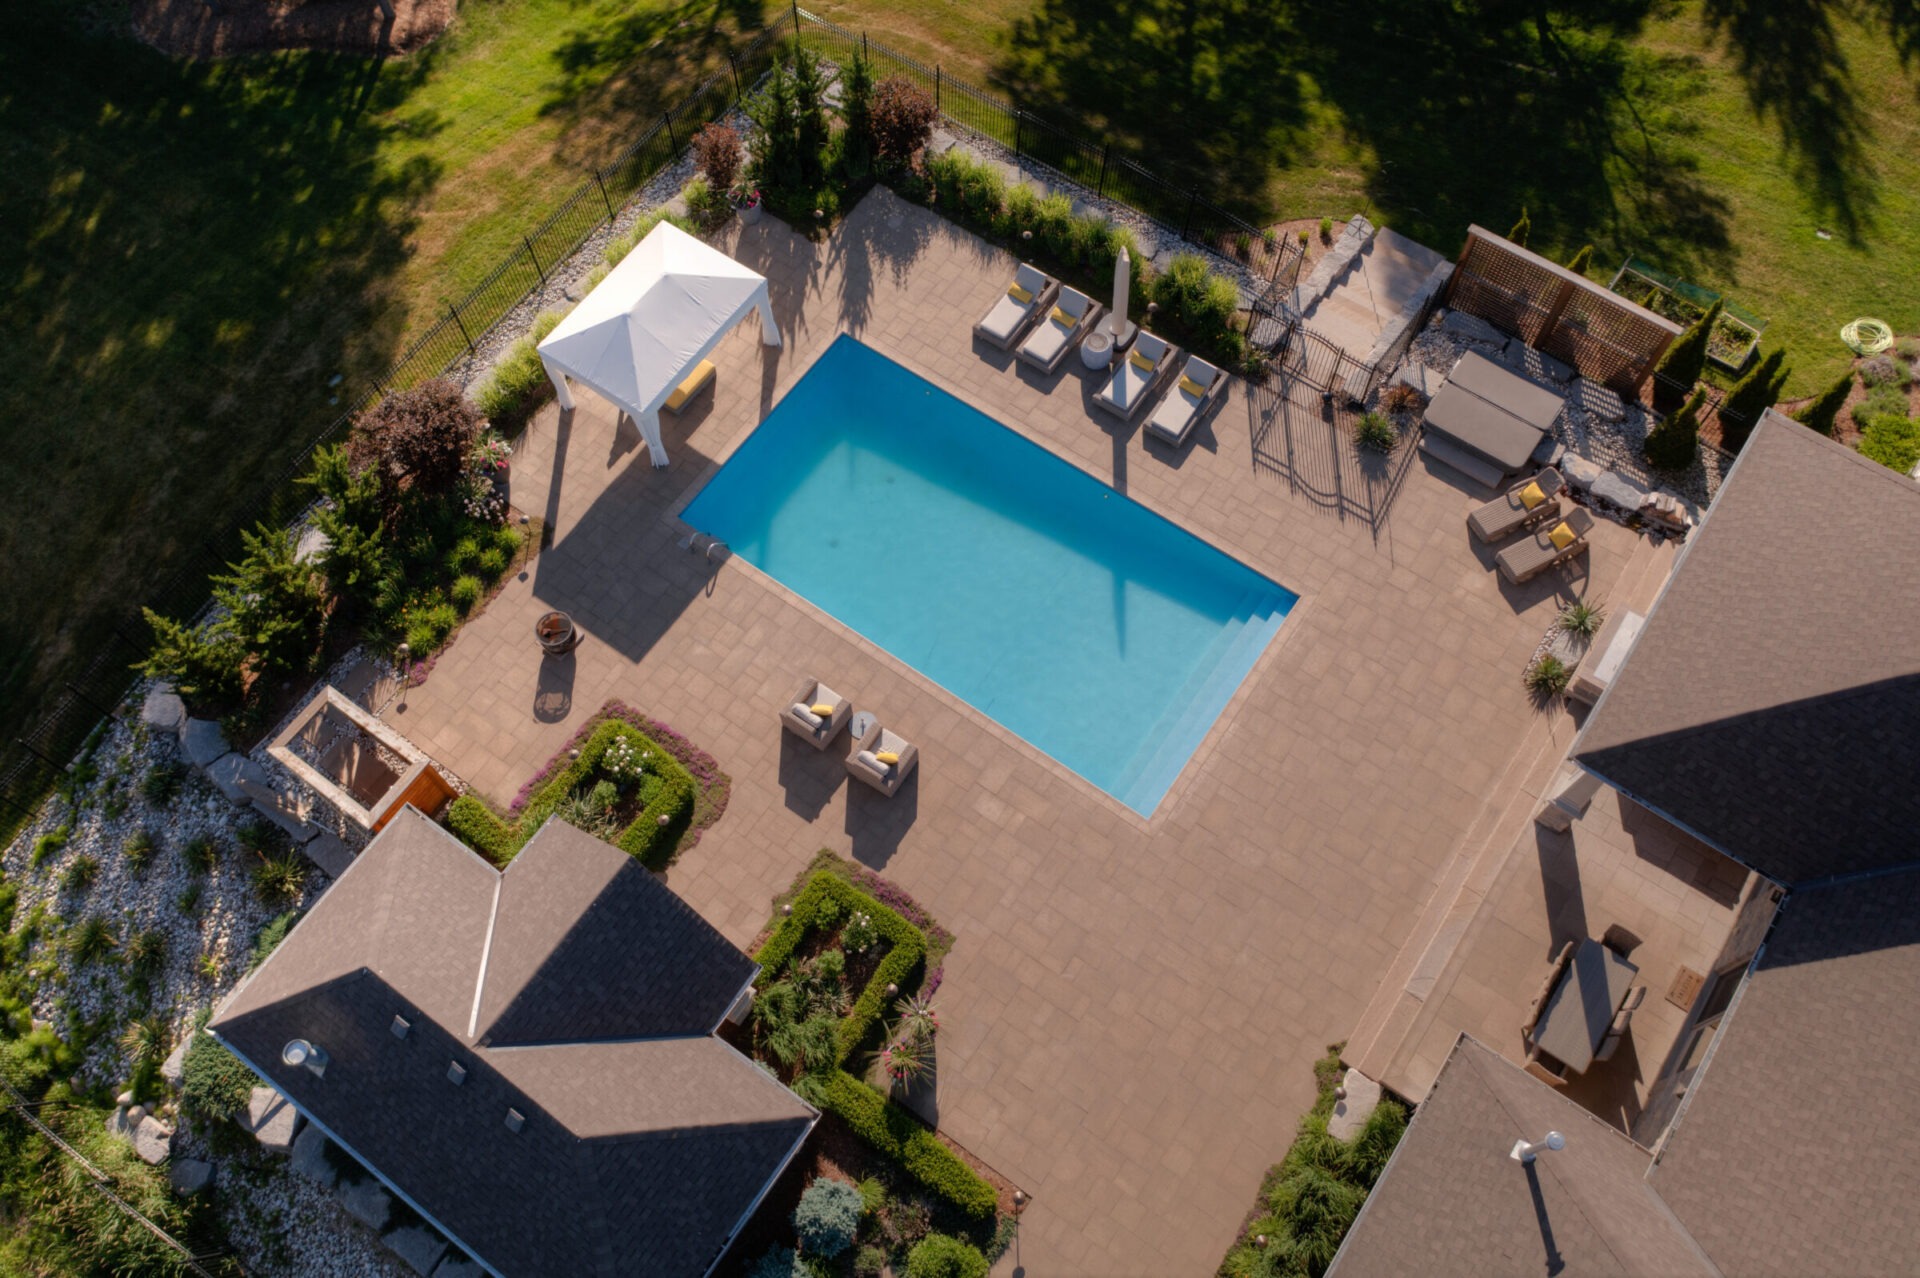 Aerial view of a residential backyard with a large swimming pool, patio area, sun loungers, landscaping, a gazebo, and part of two houses.